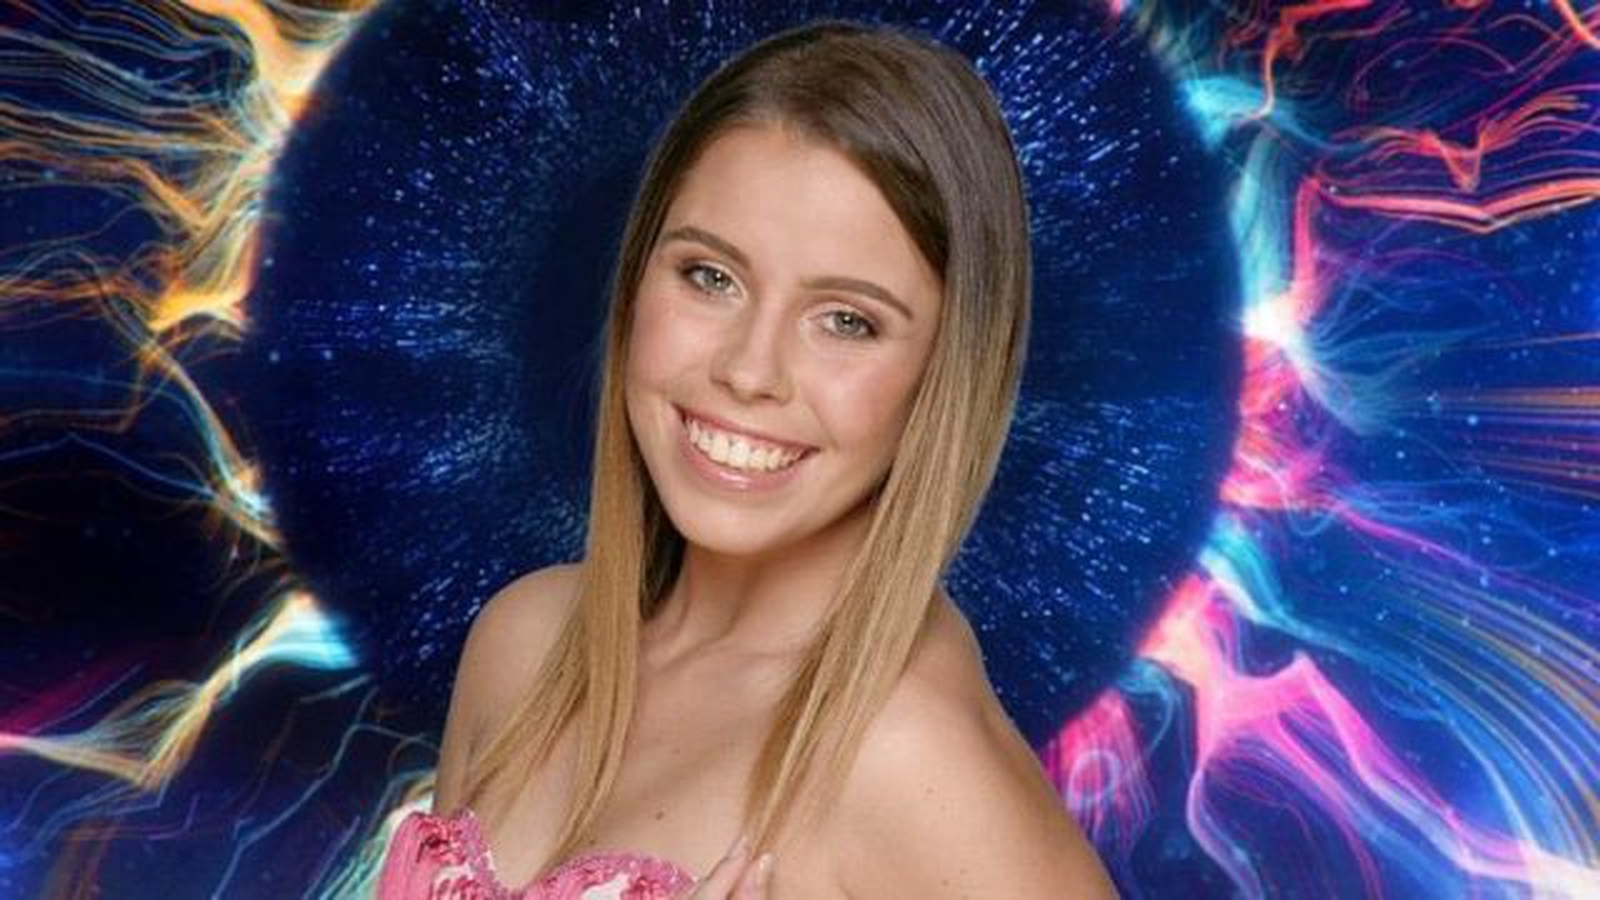 Big Brother Contestant Removed From House Over Tweets